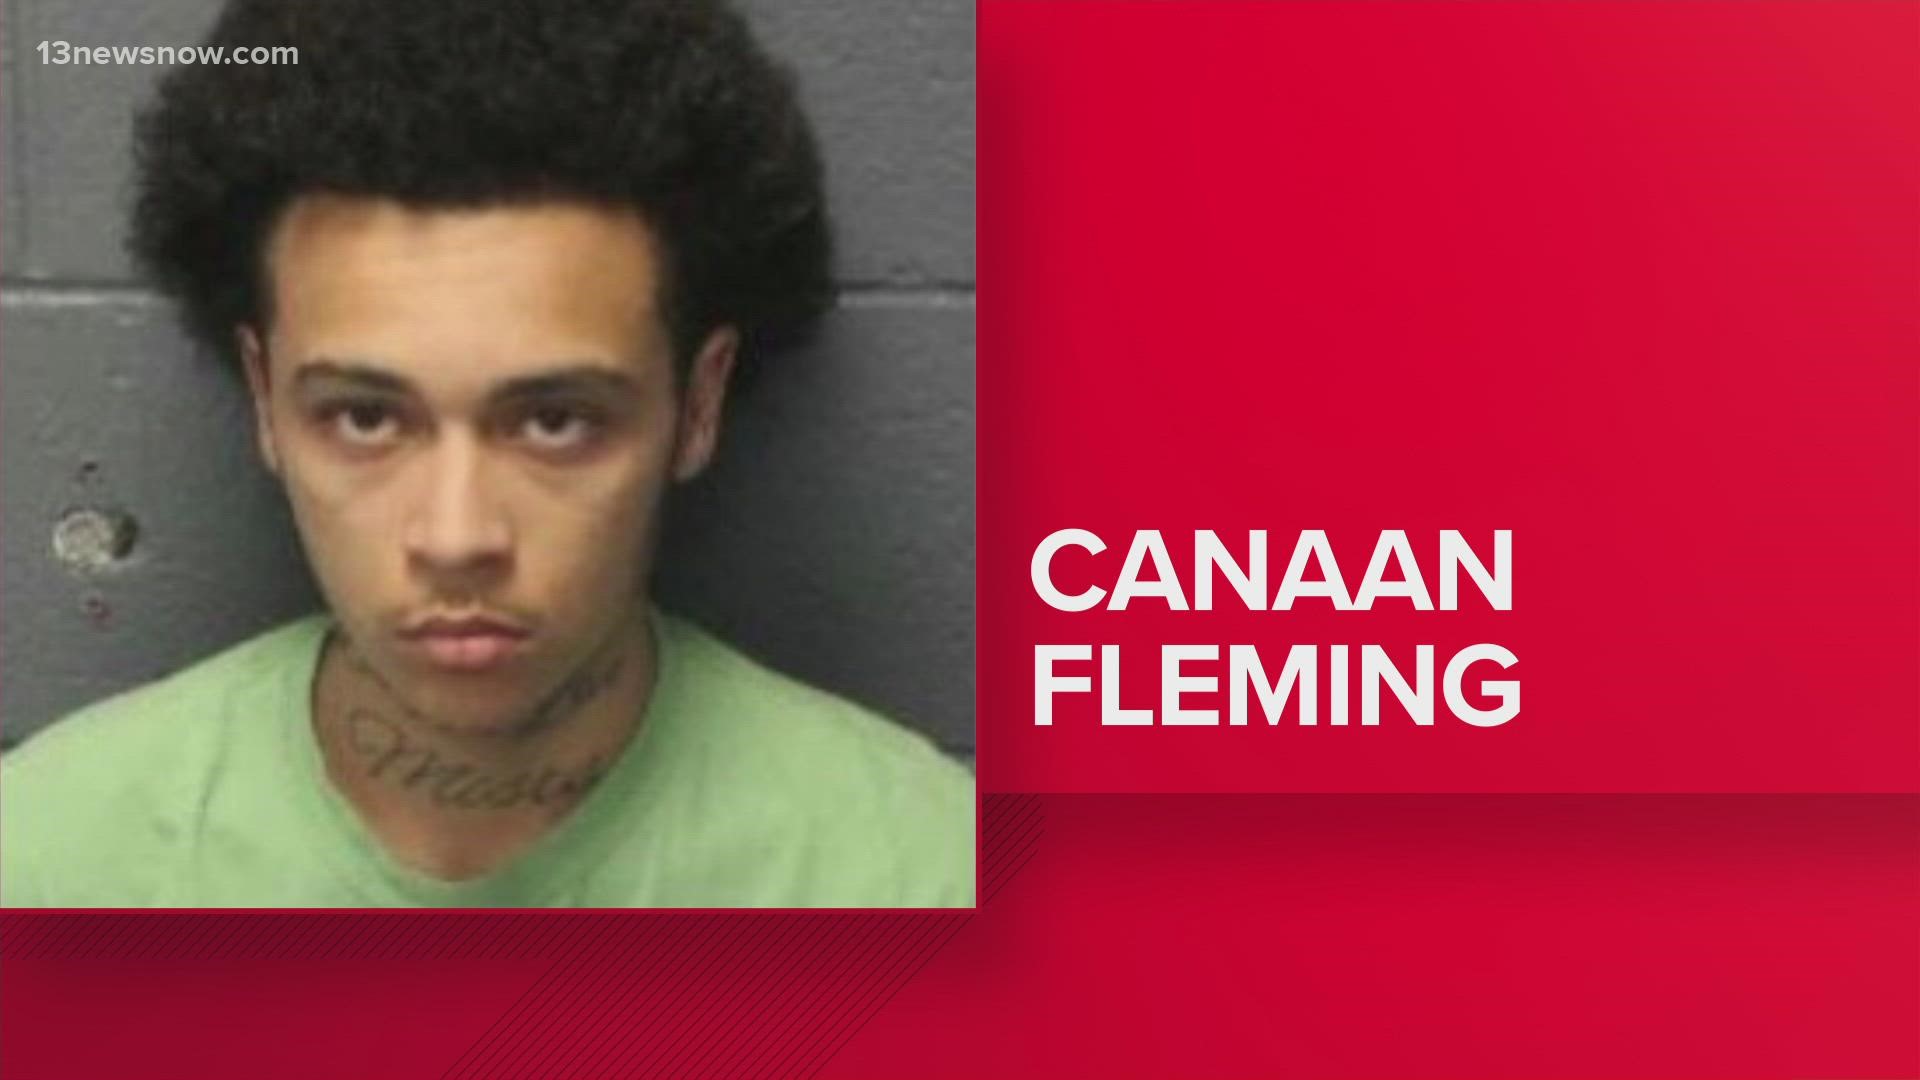 The York-Poquoson Sheriff's Office said Canaan Fleming, 22, faces charges after the child was hit by gunfire inside an apartment. The boy's mother was also arrested.